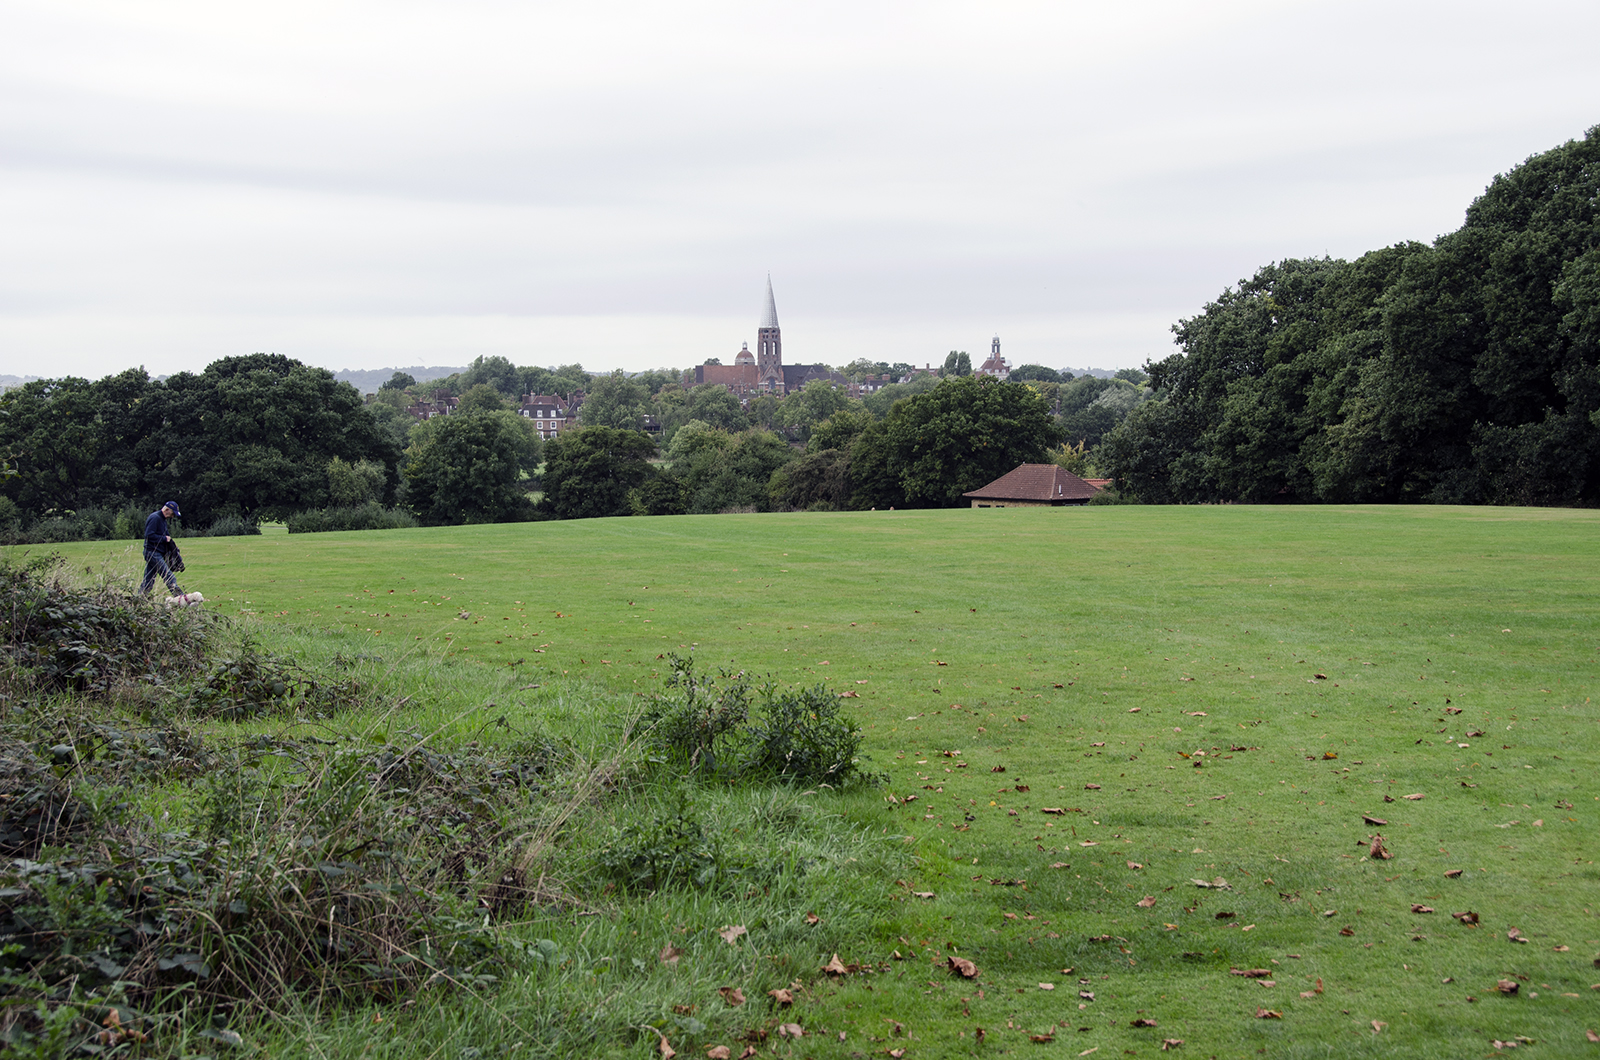 2016-09-28-BArnet_Hampstead-Heath-Exensions_-Autumn_Landscape-The-way-we-came